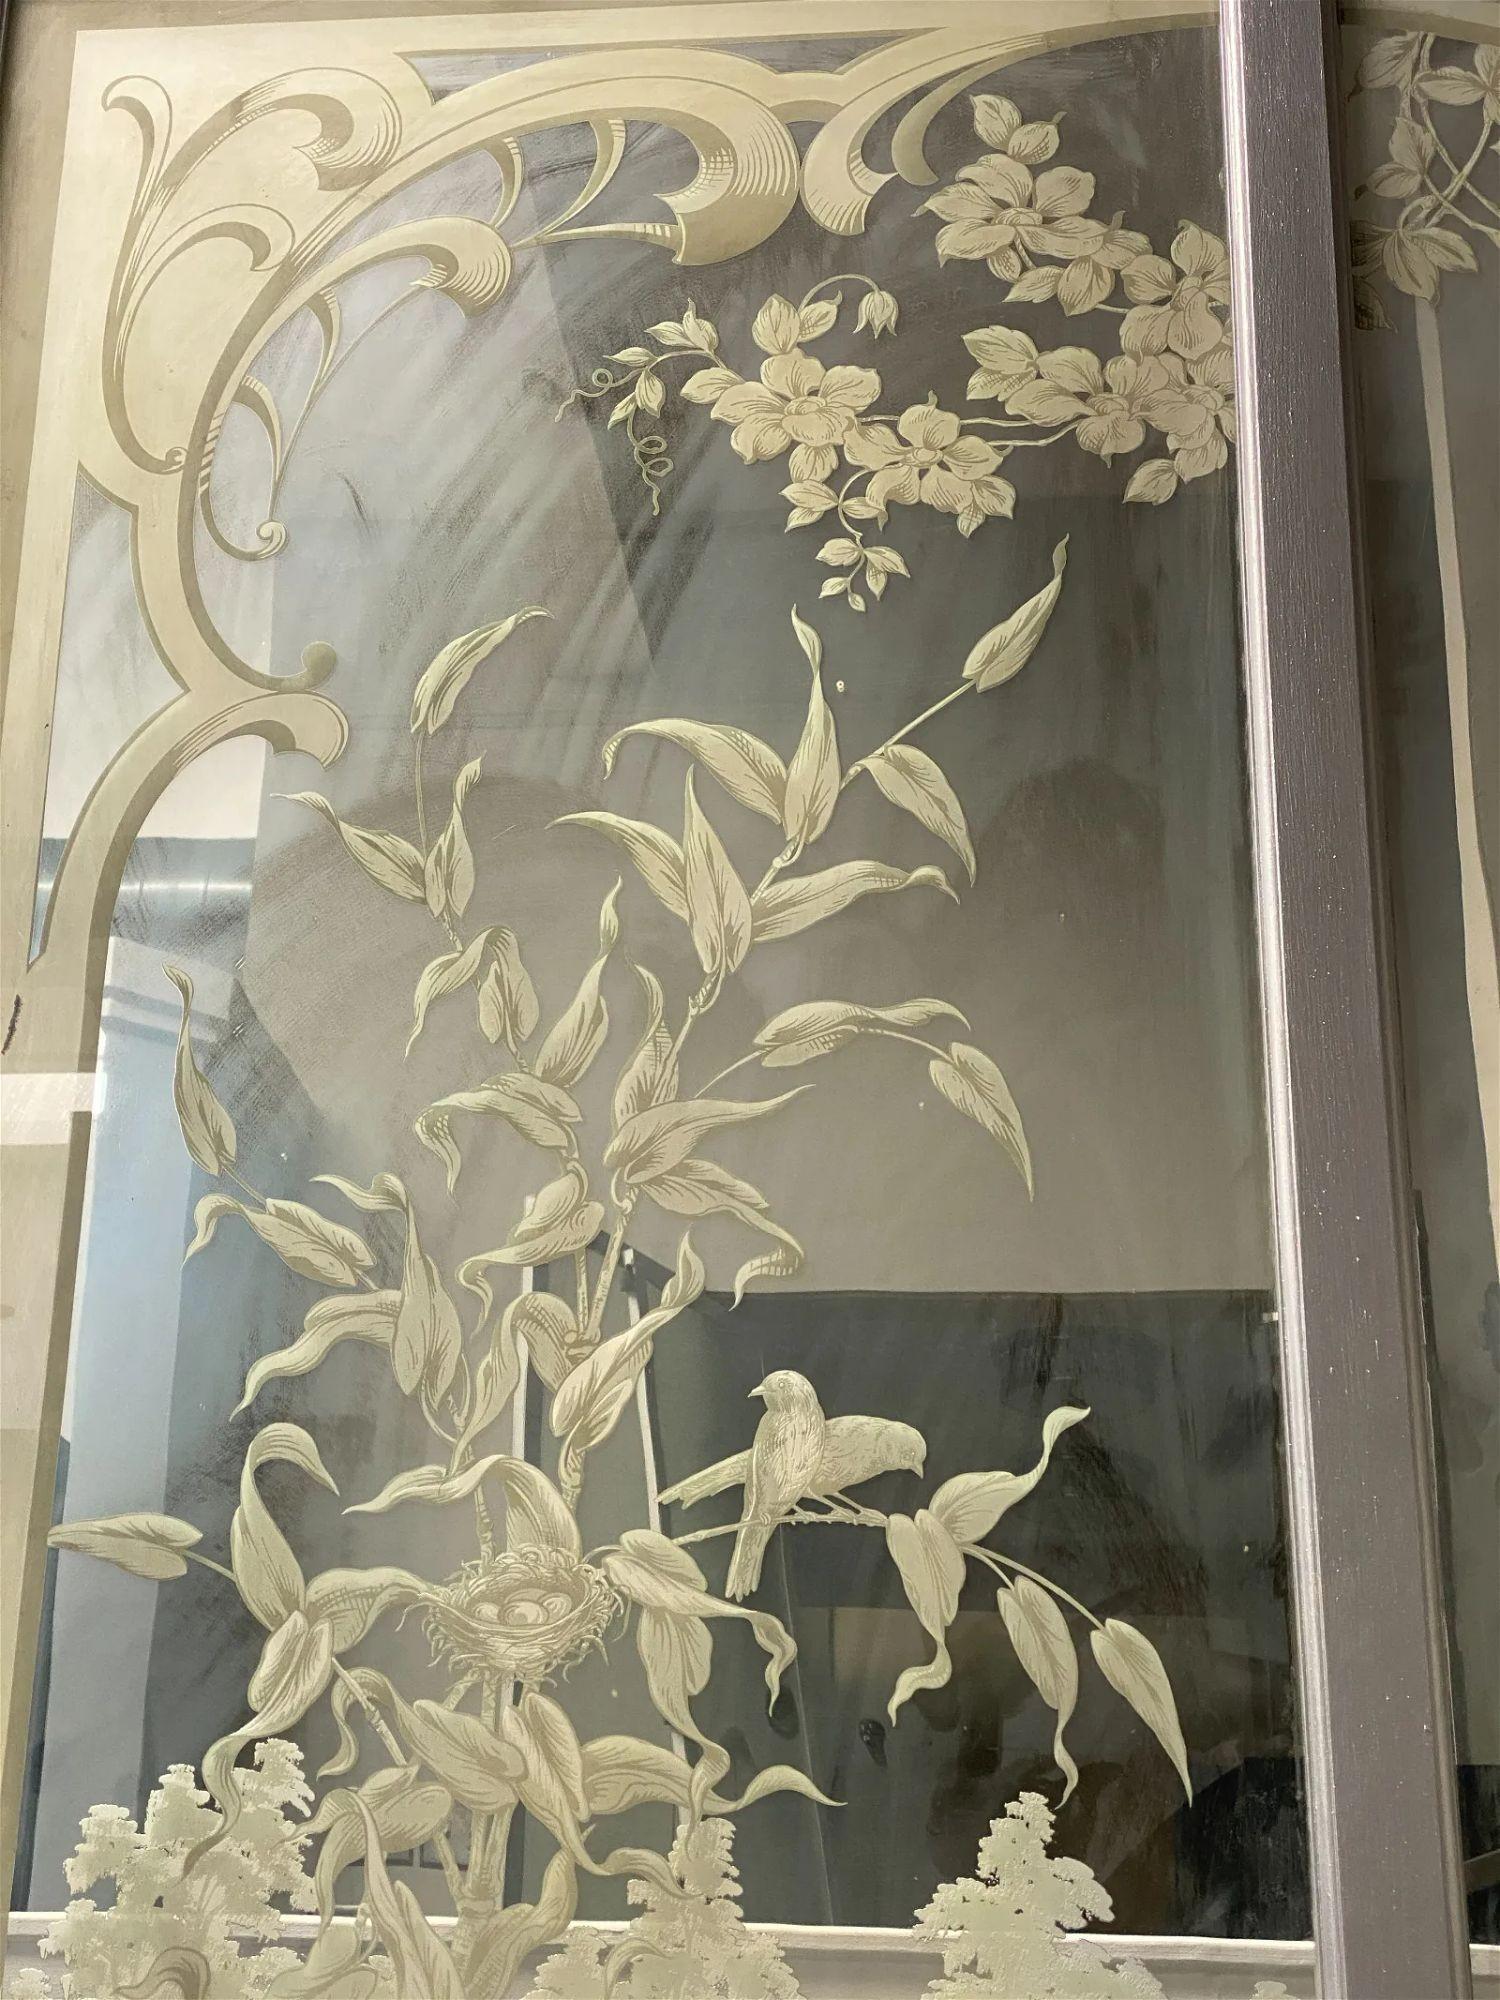 Large Etched Antique Wall Mirror. Eglomise 19th century depicting a french chateau in a garden with swan birds foliage and lake
